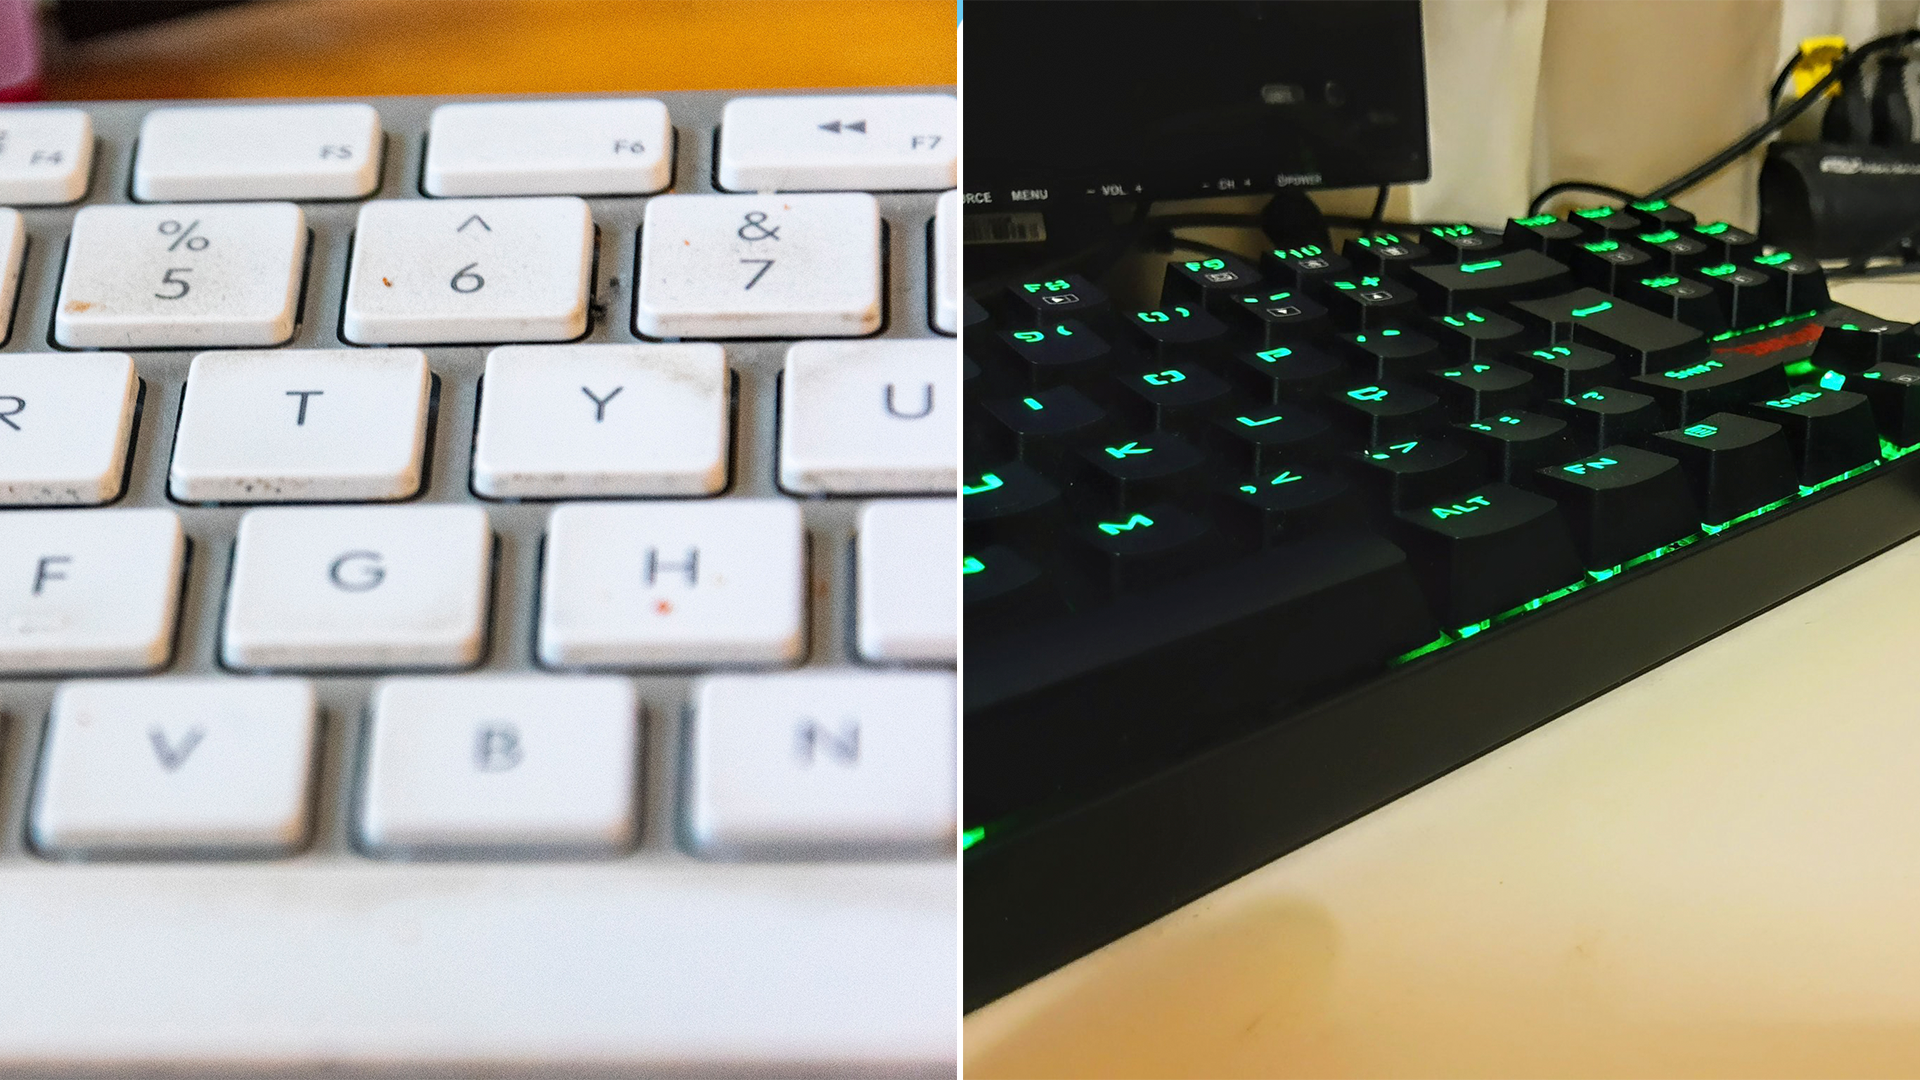 Keyboards often accumulate dirt from everyday use, but there are a few solutions (Photo: pixbay)